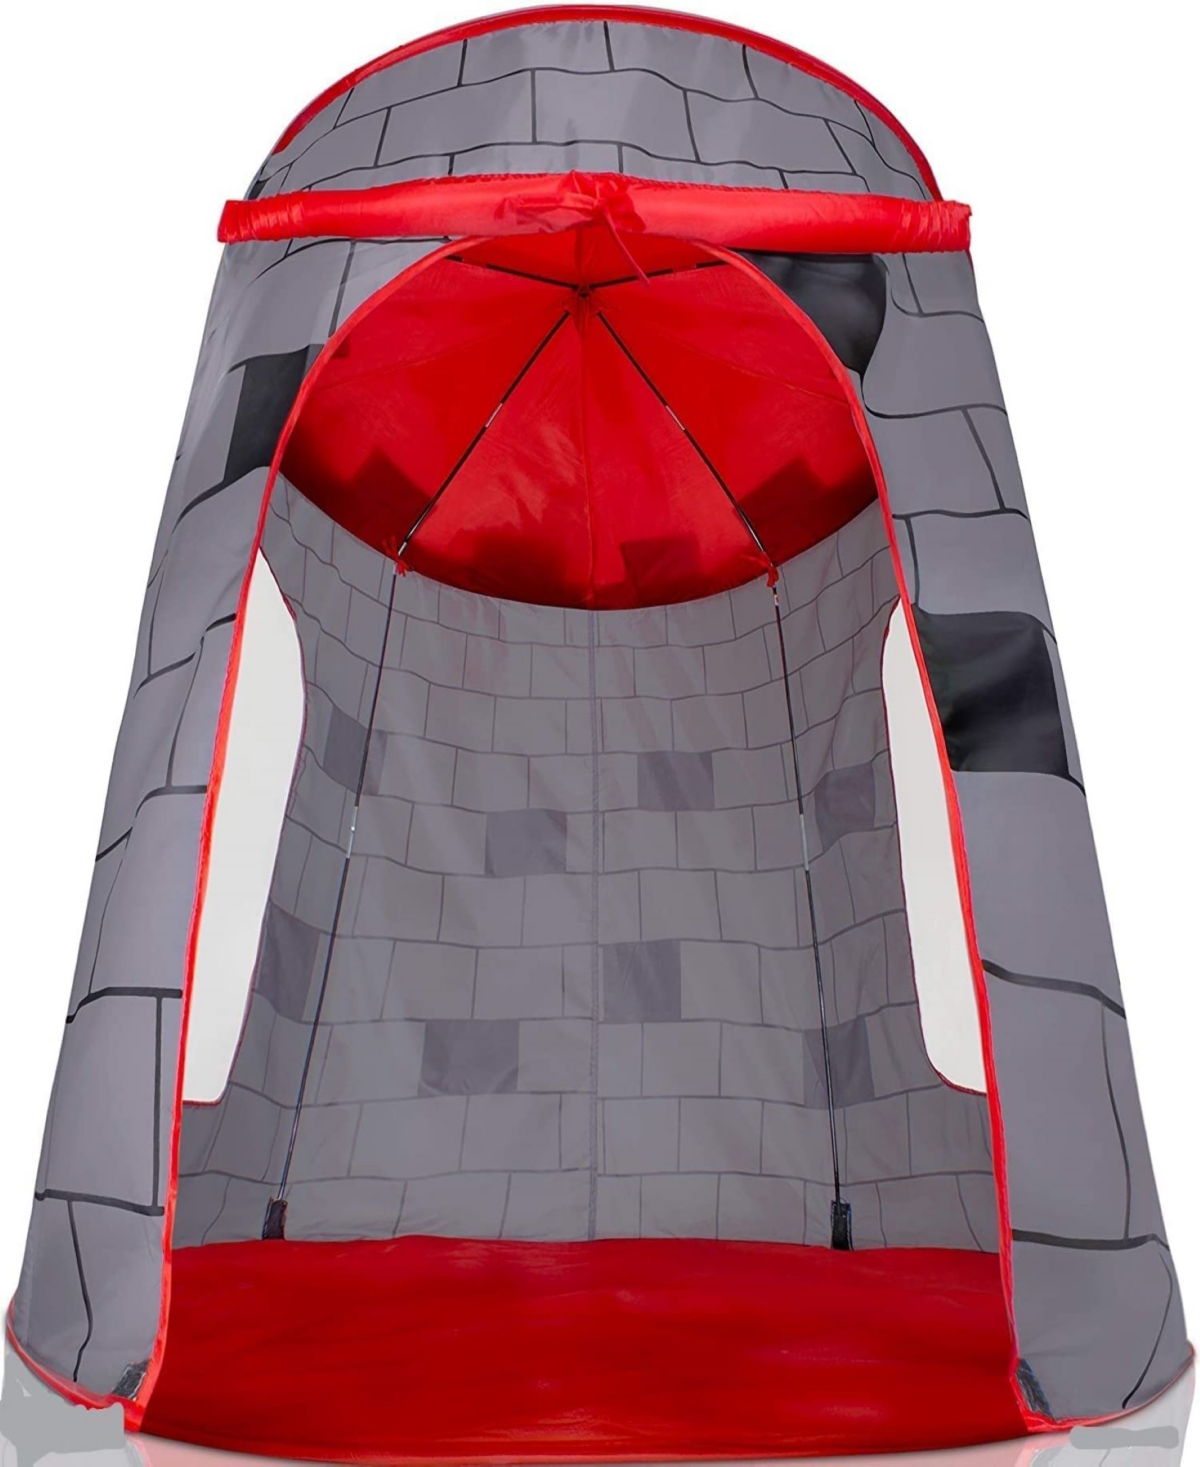 Shop Play22 Kids Play Tent Knight Castle Portable Fordable Camper Tent In Multicolor